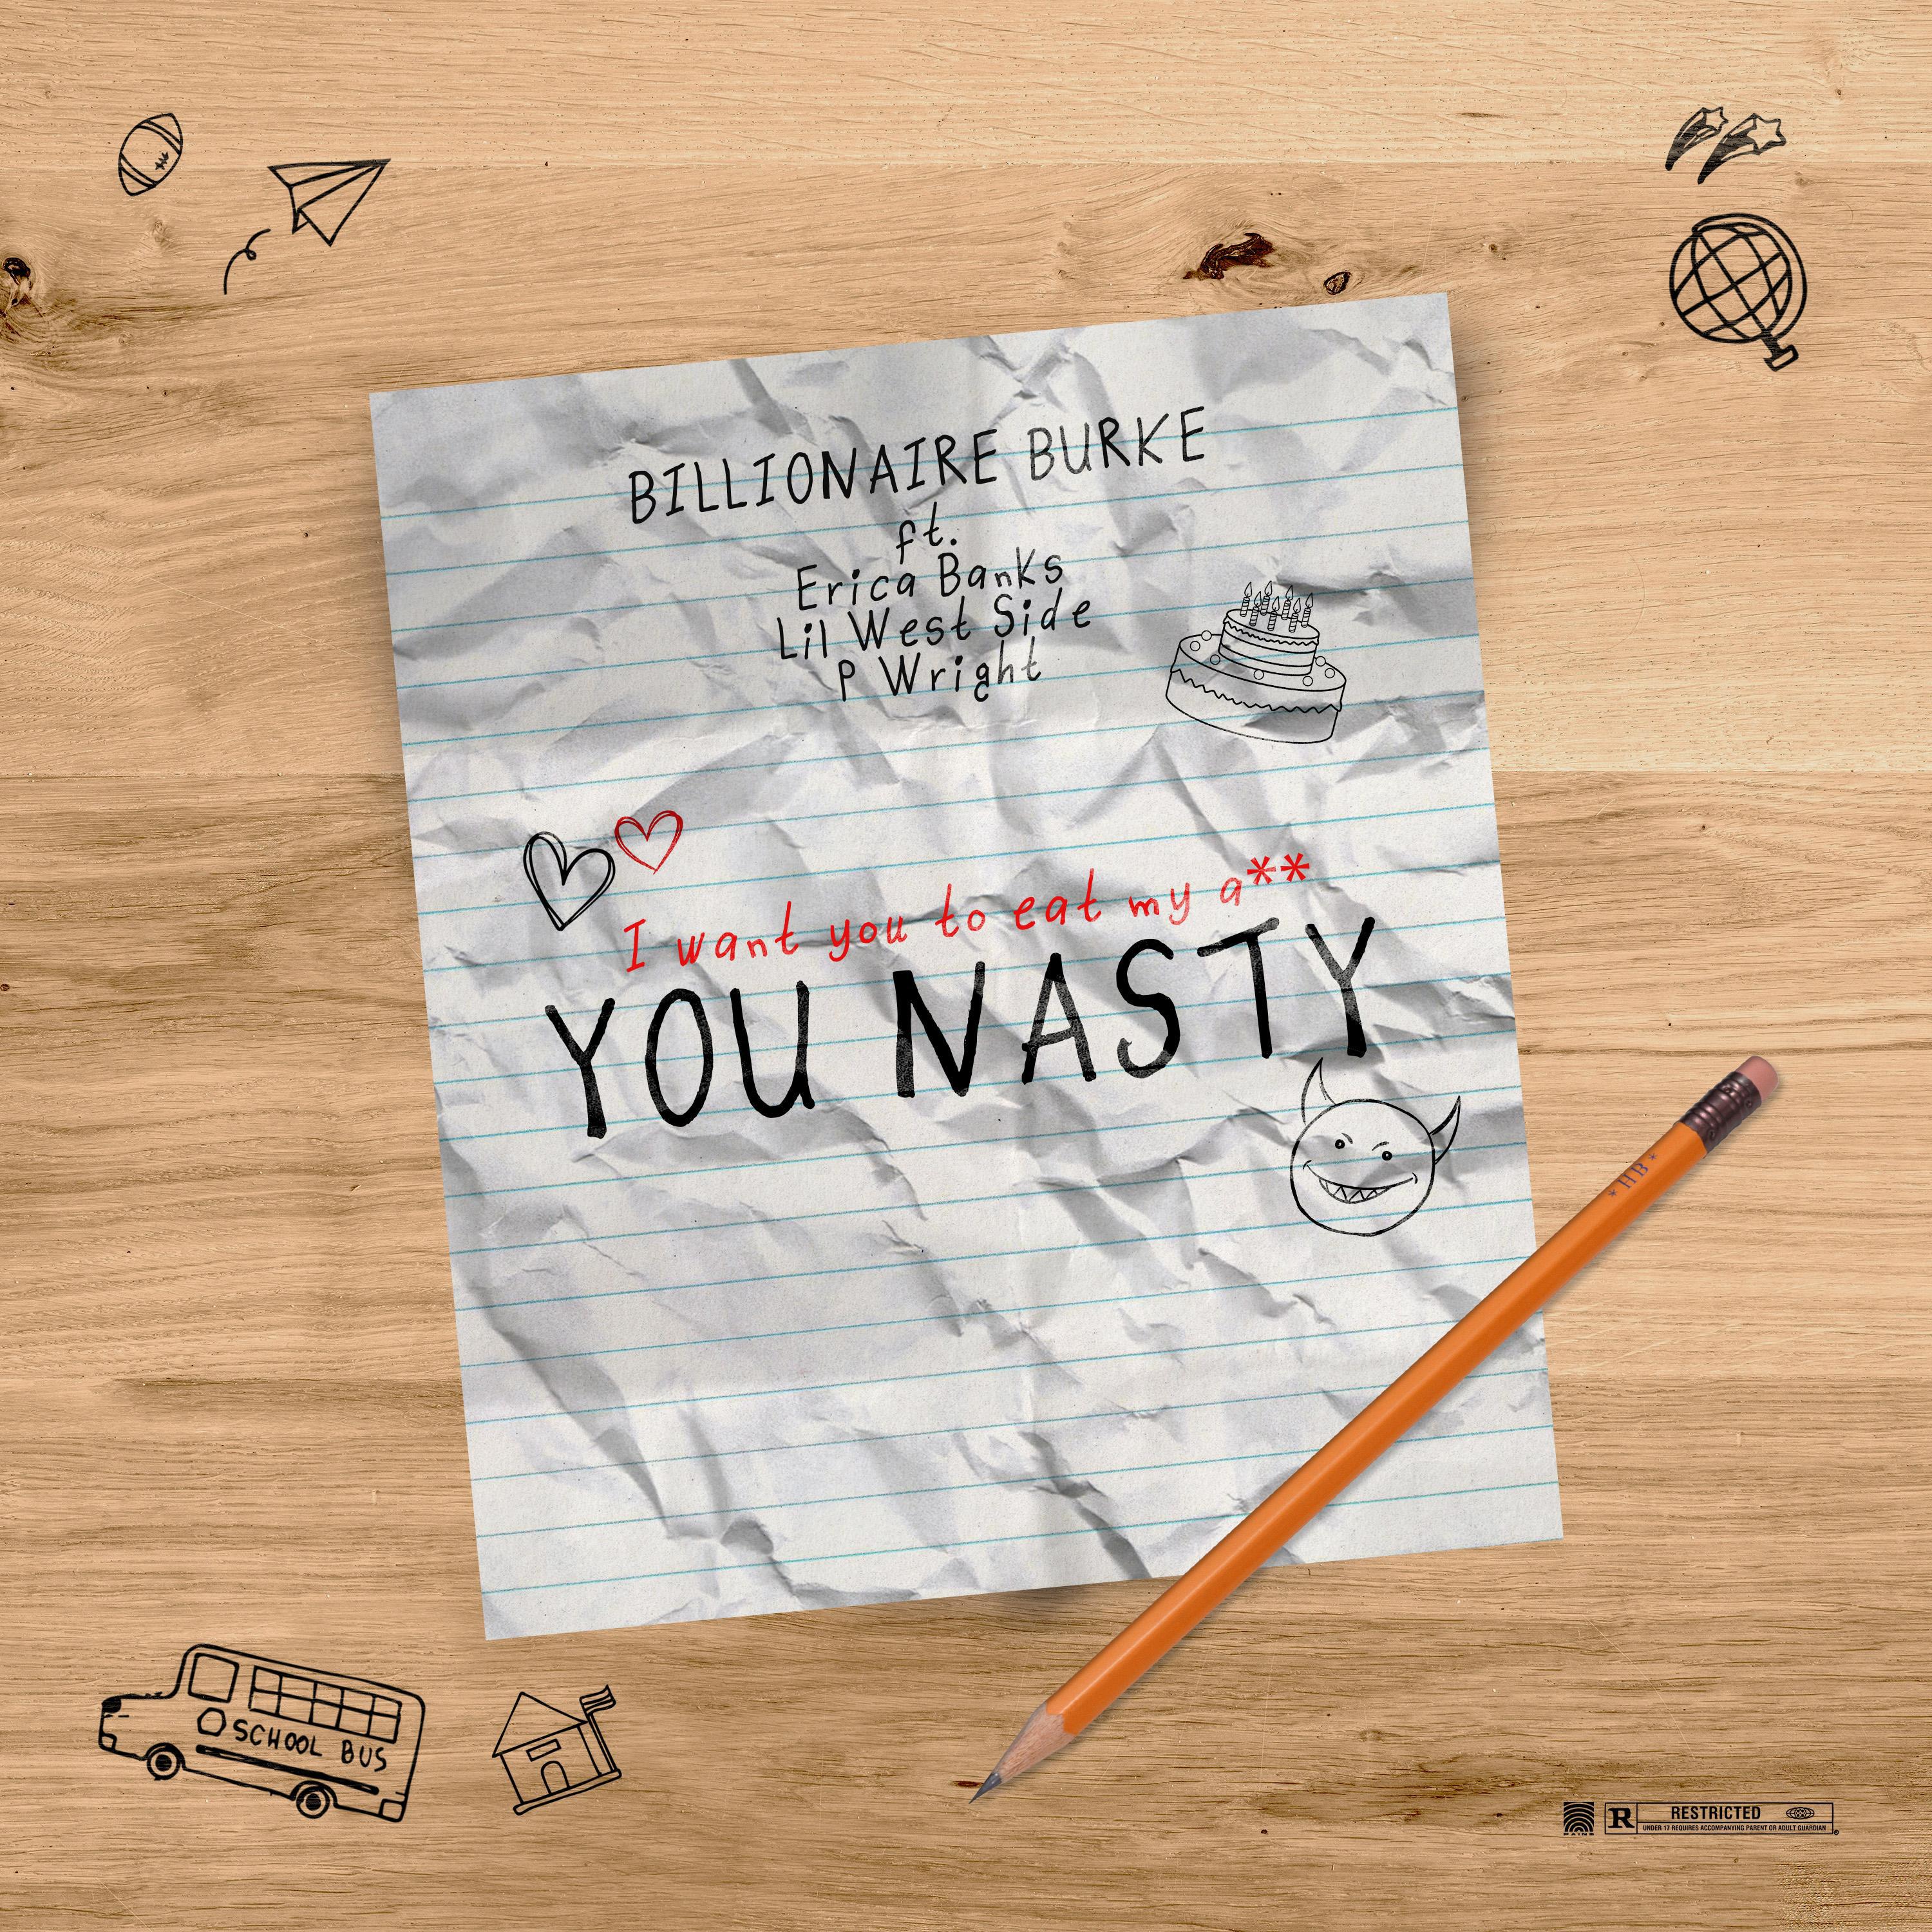 Billionaire Burke - You Nasty (feat. Erica Banks, Lil westside & P Wright)